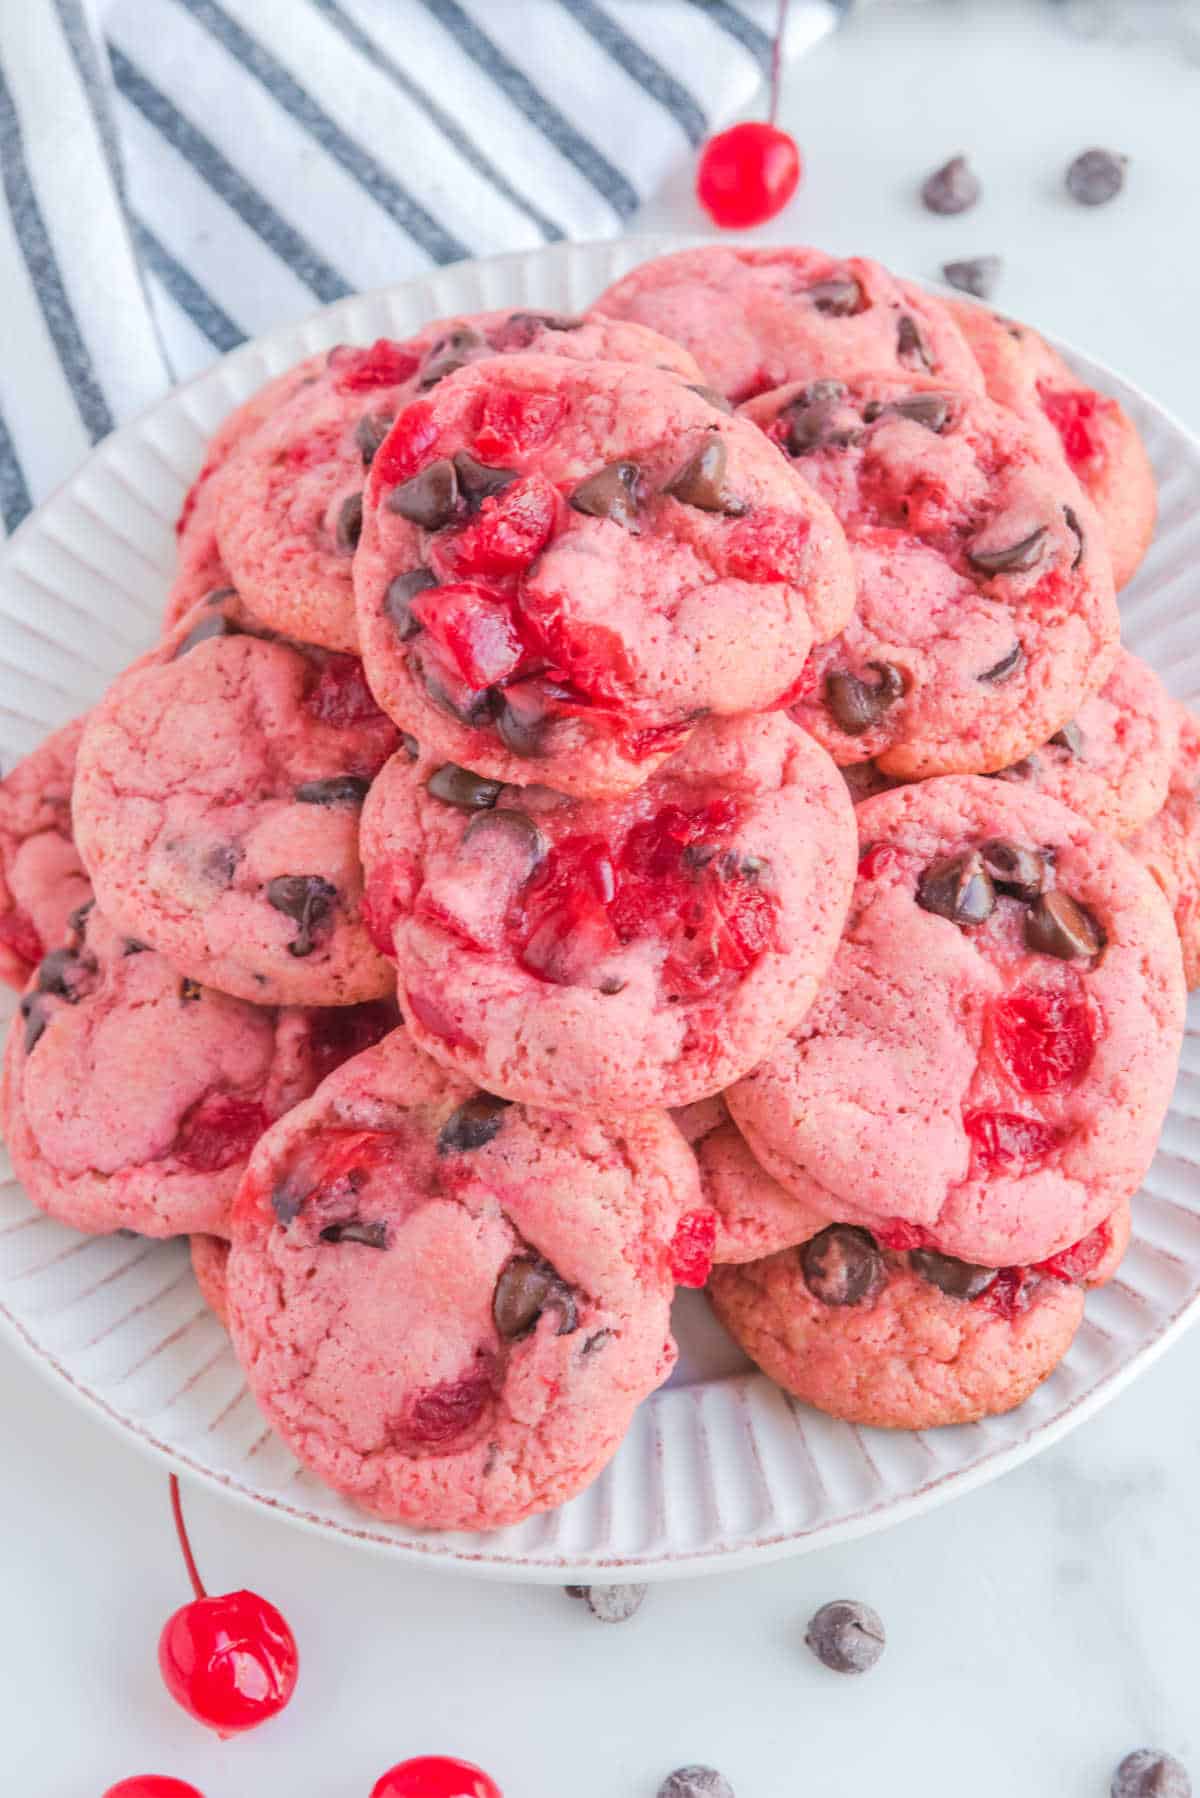 A pile of cherry cookies on a plate.